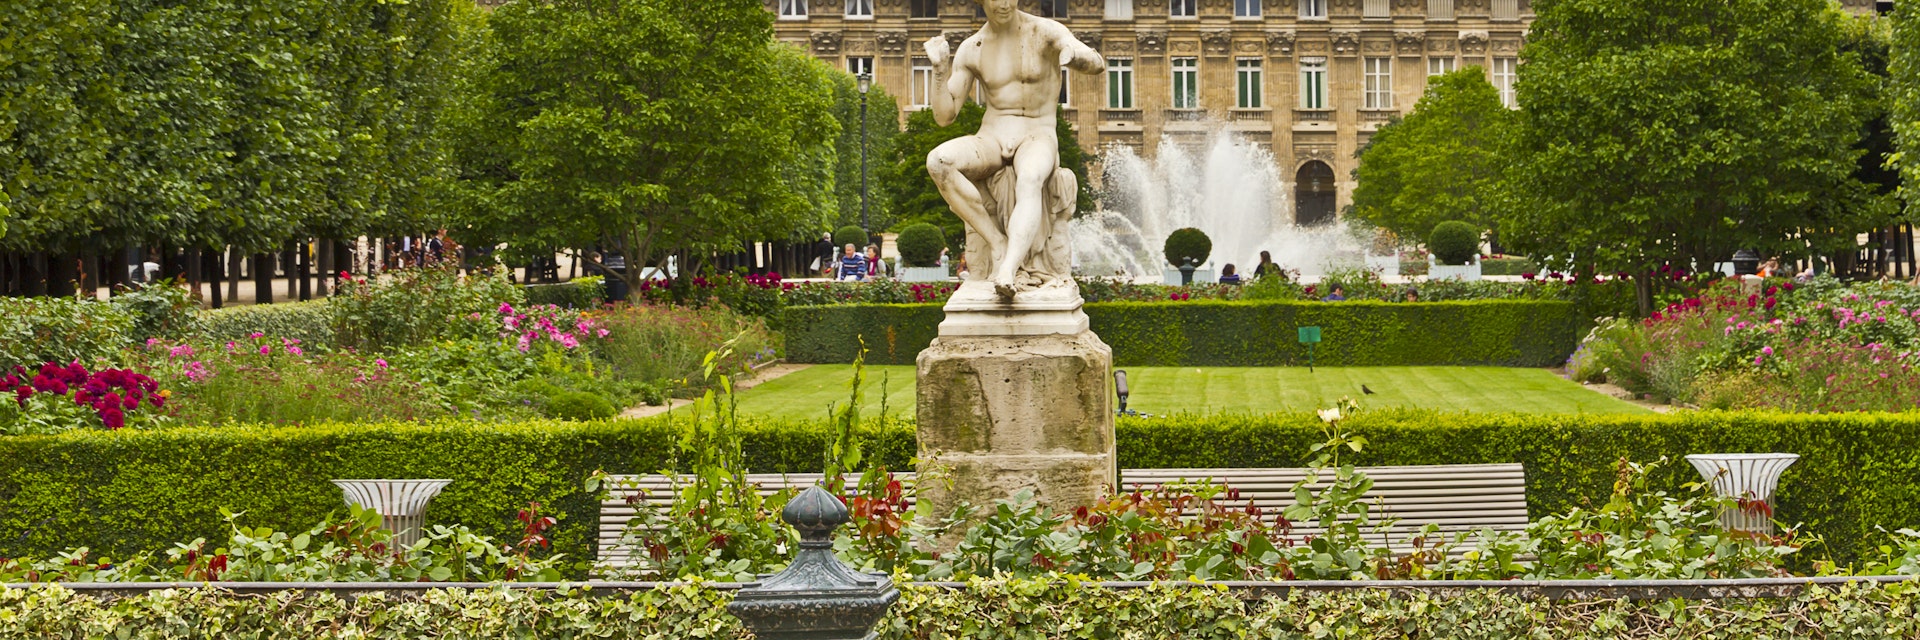 Palais-Royal - Information and Location of the Palace in Paris